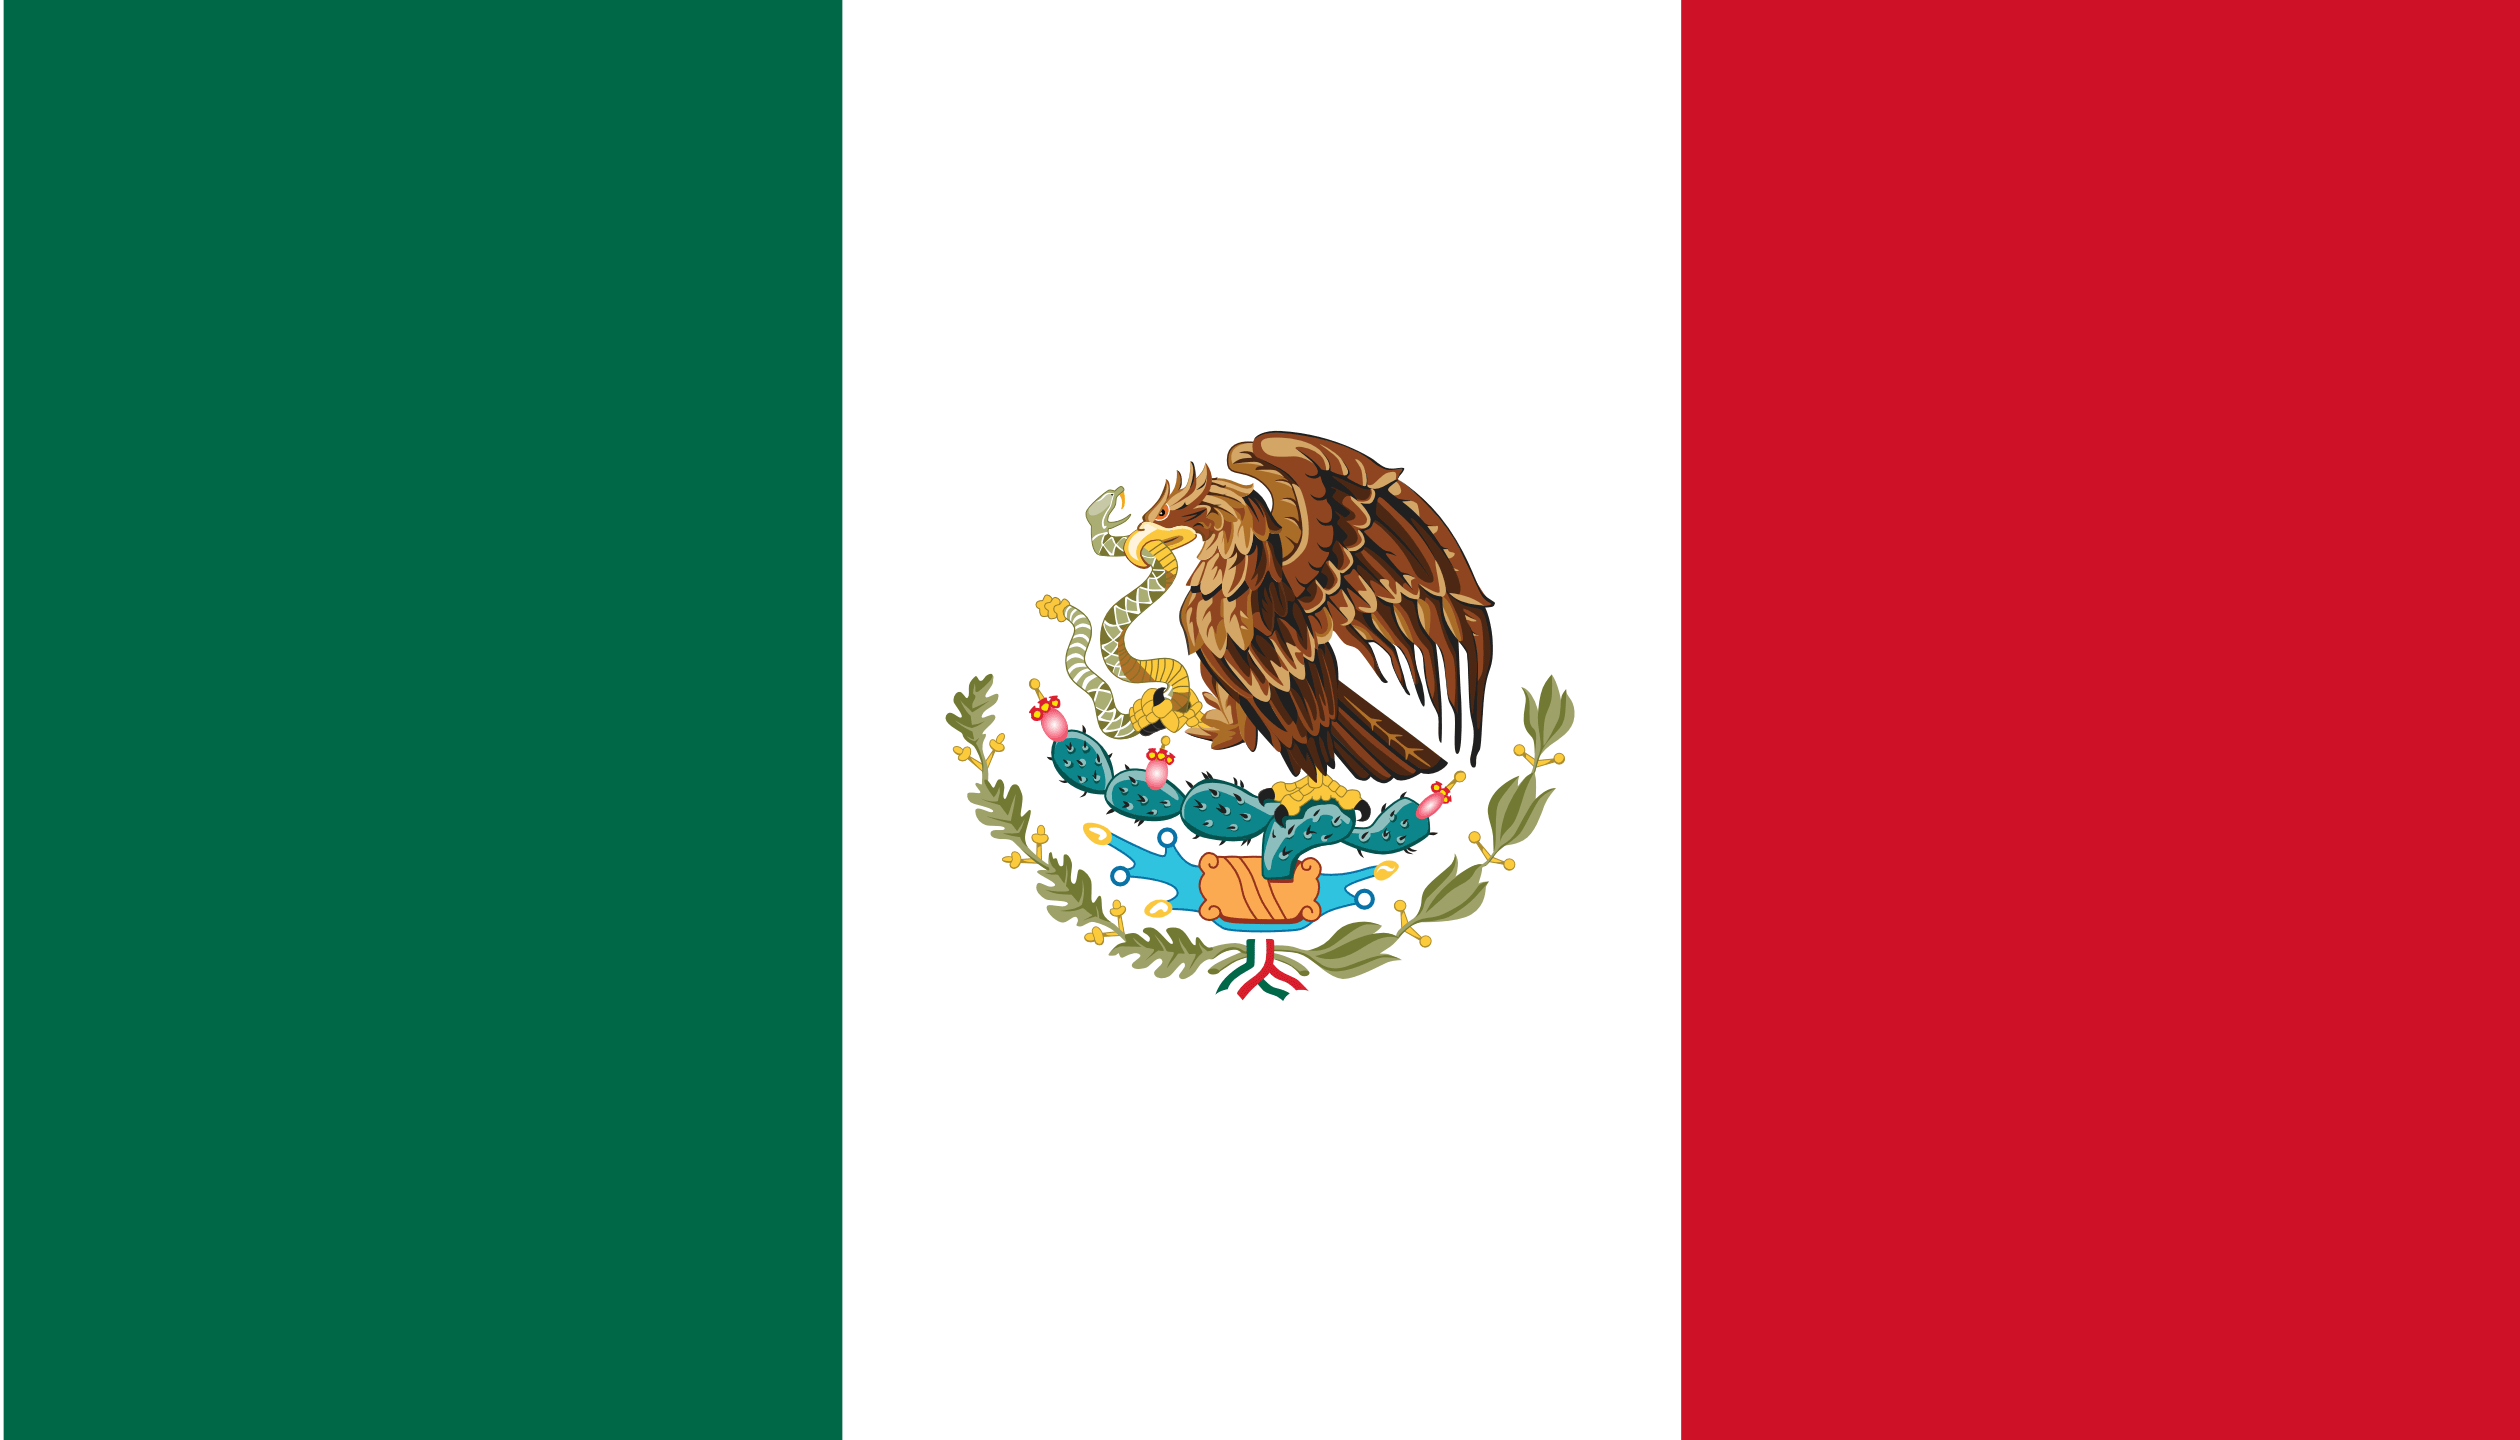 the image shows the mexican flag